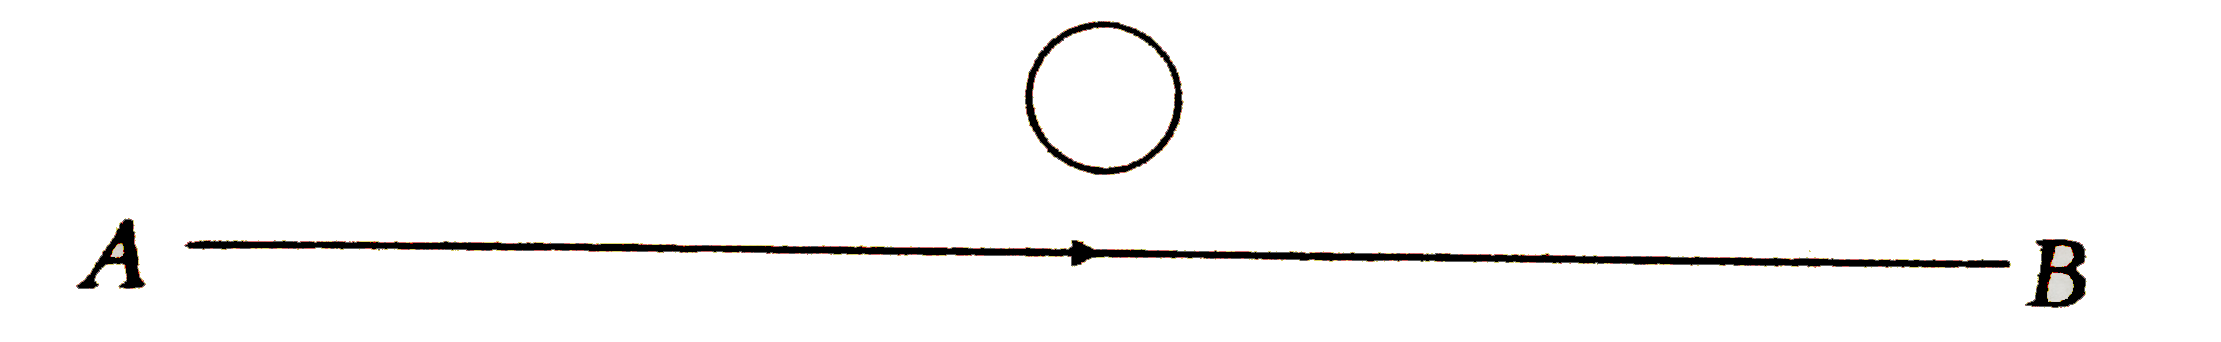 The current flows from A to B as shown in the figure. What is the direction of current in circle?